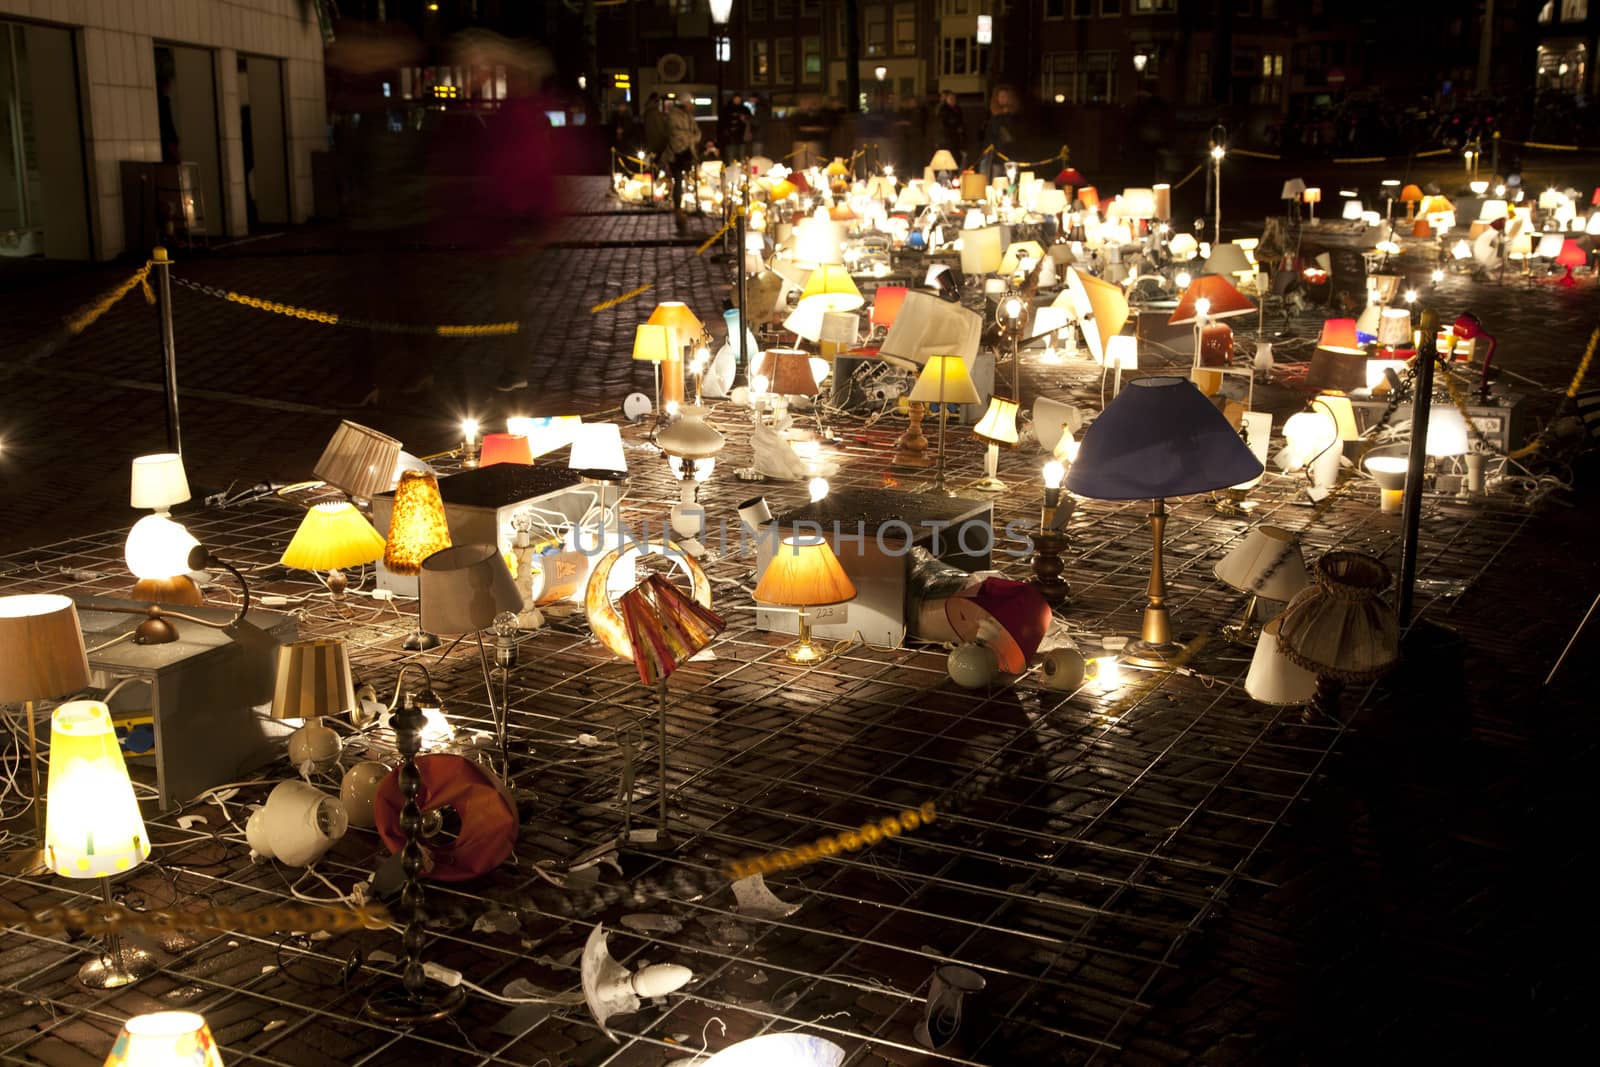 AMSTERDAM, THE NETHERLANDS: Art with desk lamps with lights at annual Amsterdam Light Festival on December 30, 2013. Amsterdam Light Festival is a winter light festival  